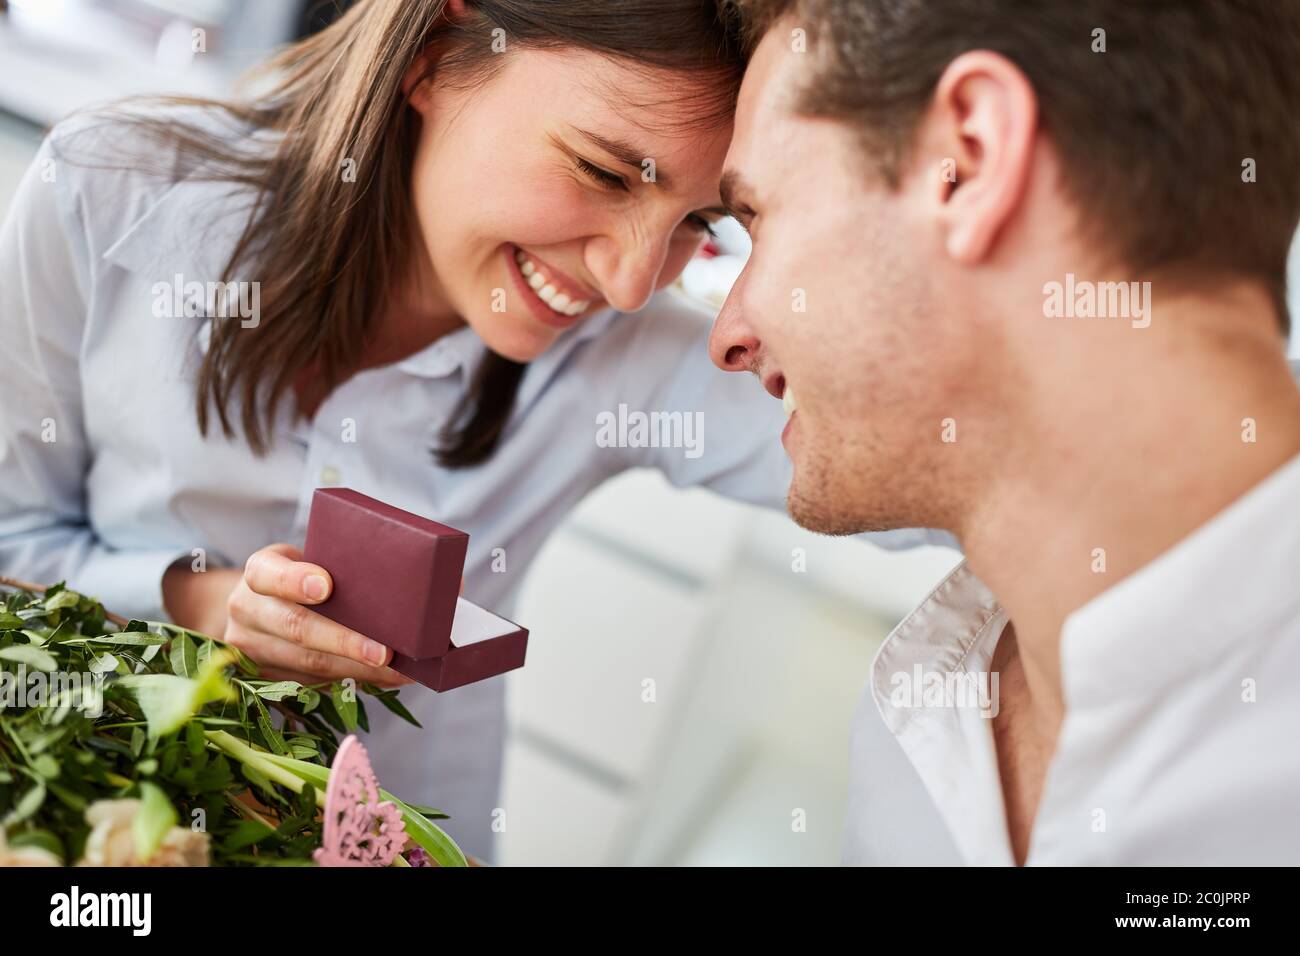 Happy woman holding box with engagement ring after request from man on Valentine's Day Stock Photo